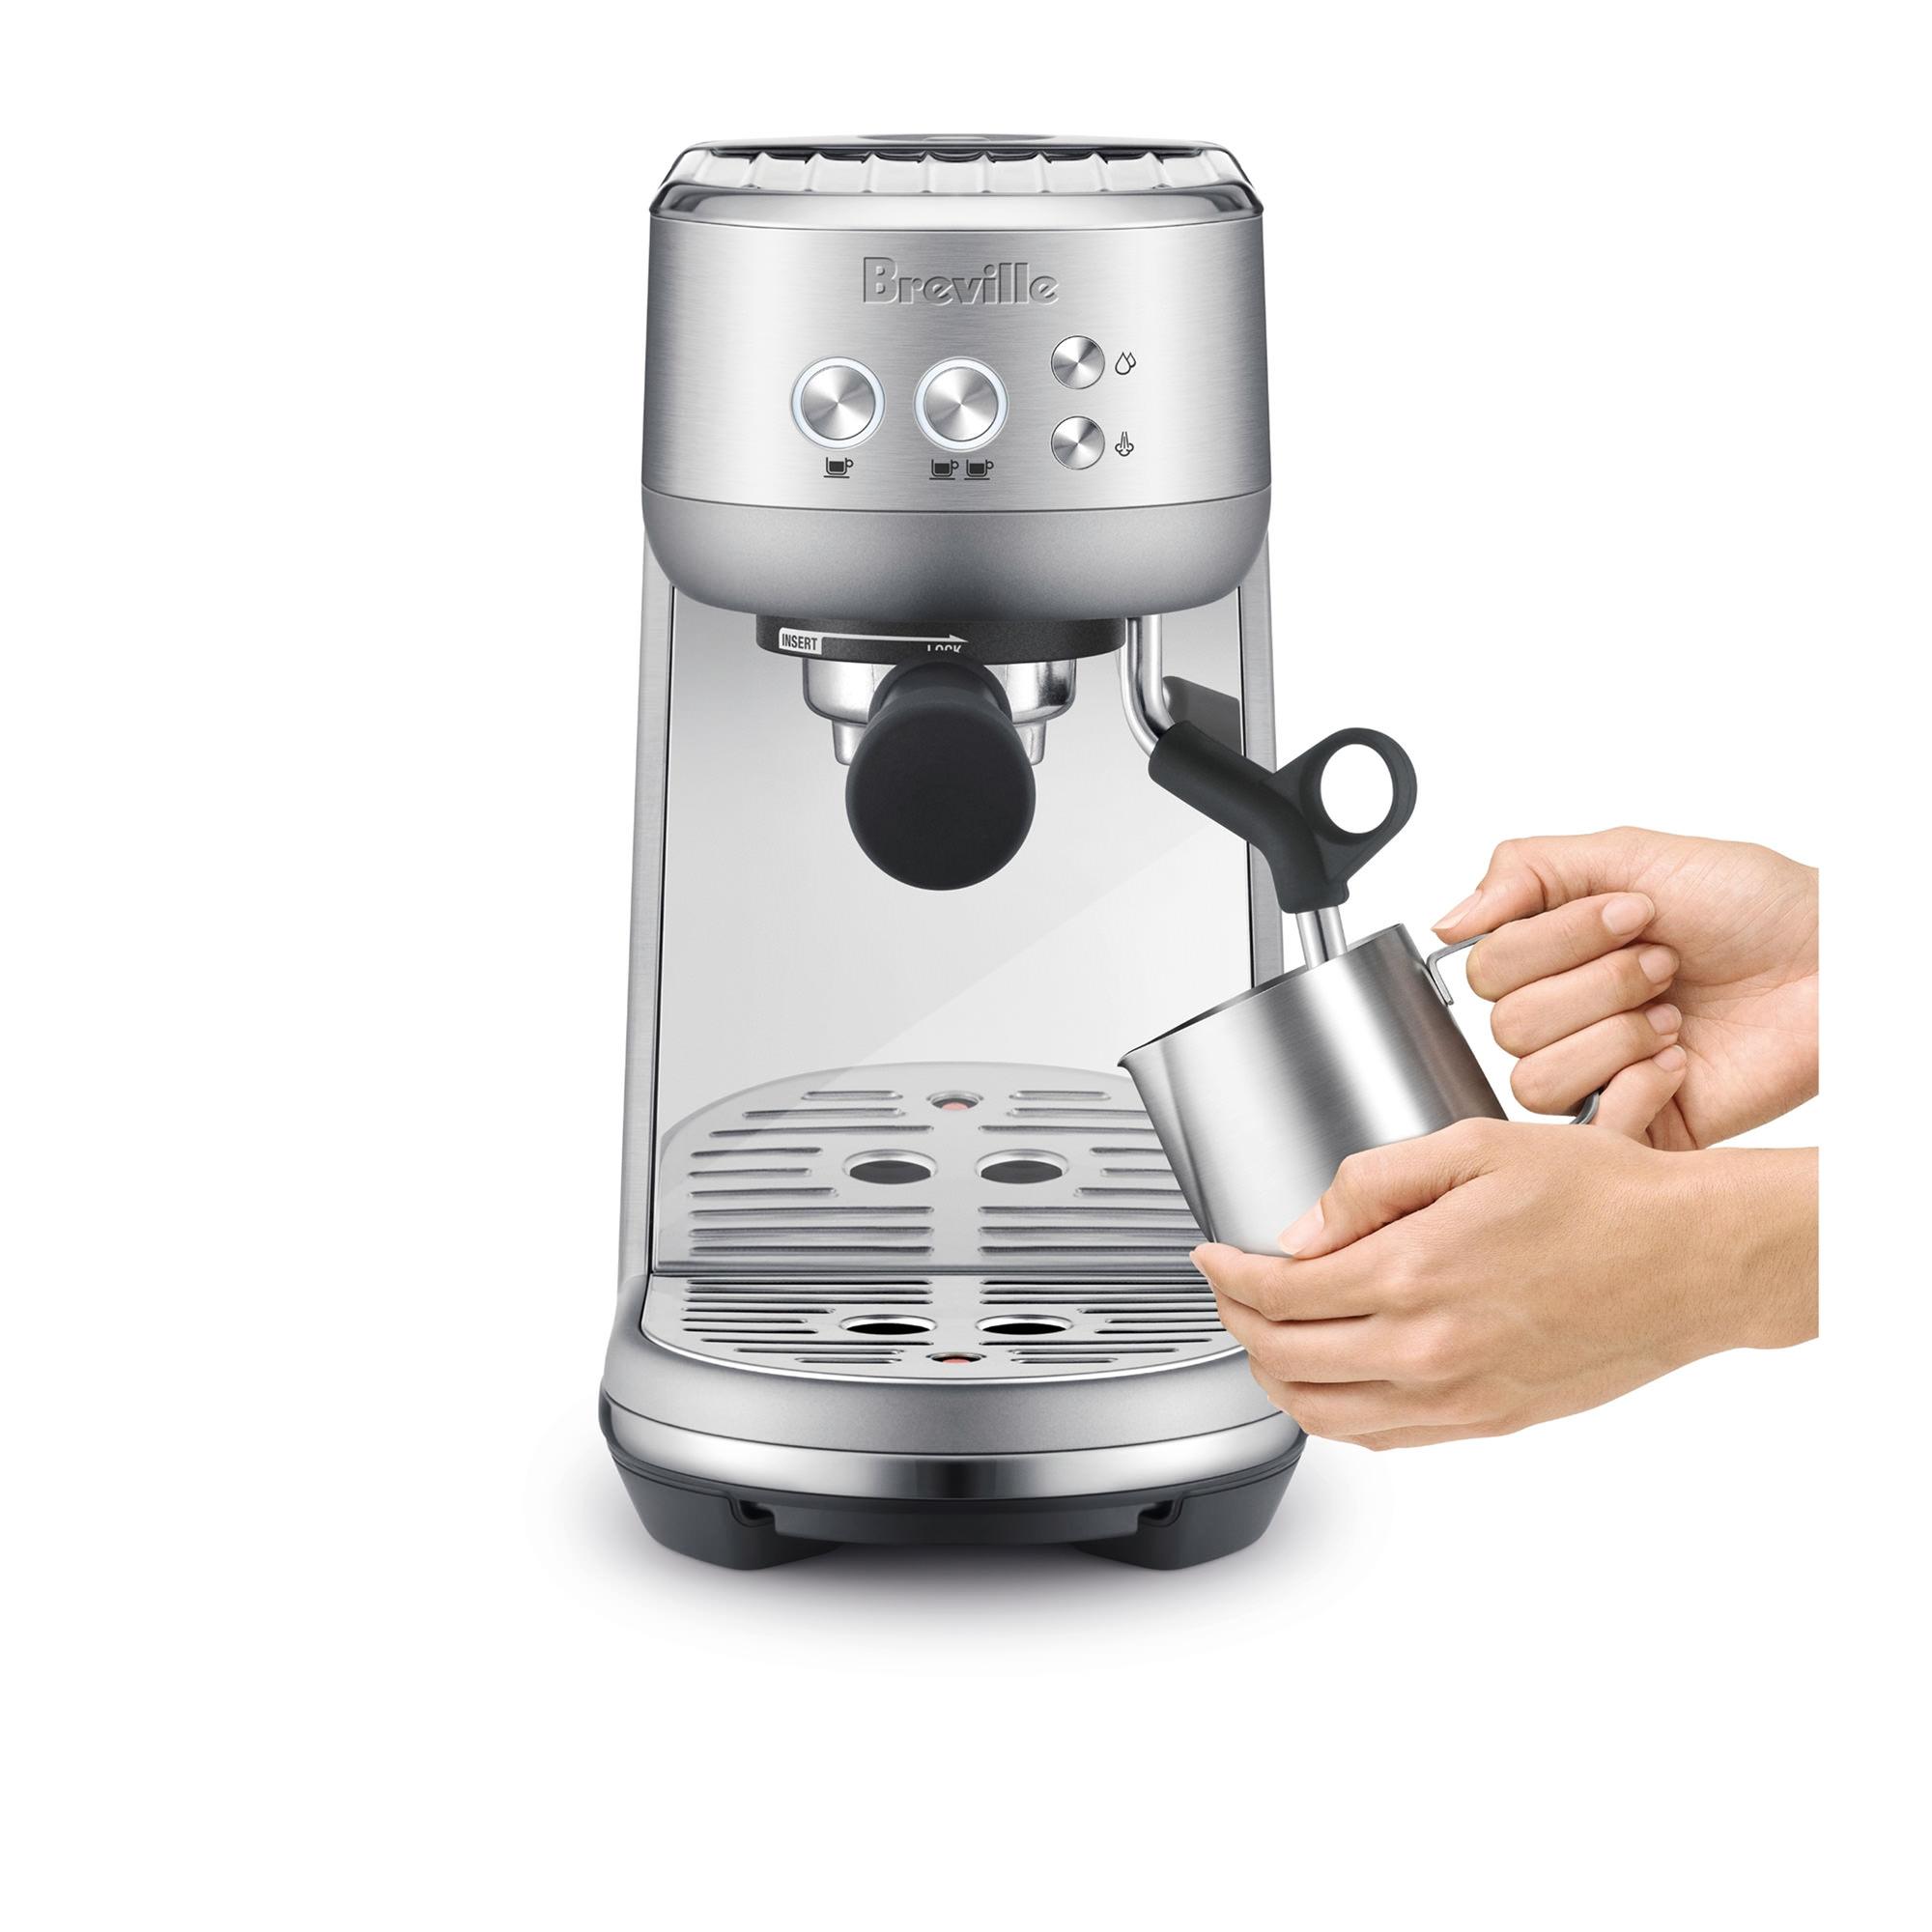 Breville The Bambino Espresso Machine Brushed Stainless Steel Image 2